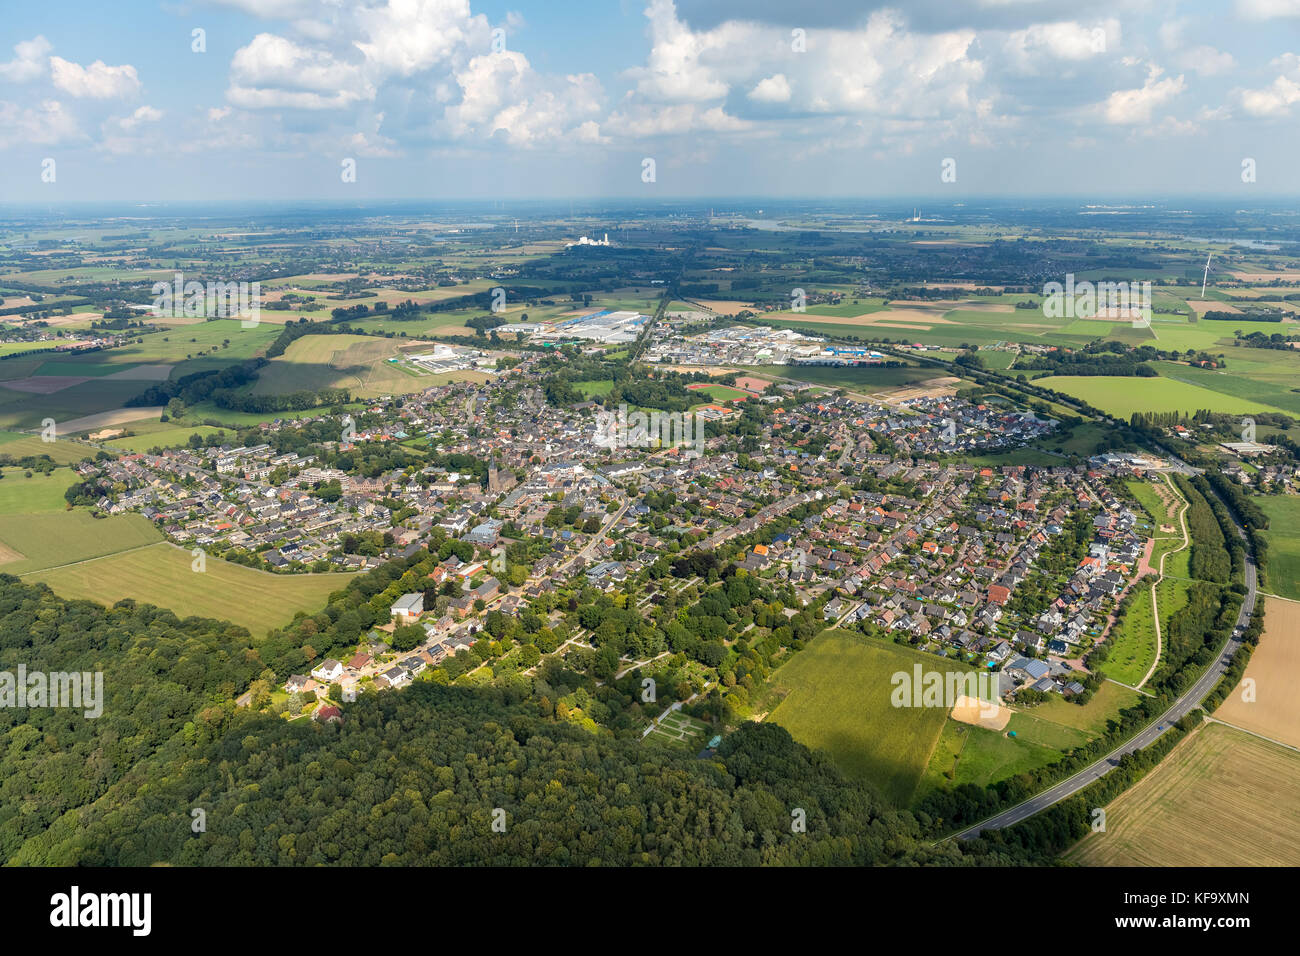 Alpen Overview over the Town of Alpen, , Niederrhein, North Rhine-Westphalia, Germany, Alps, Europe, Aerial View, Aerial, aerial photography, aerial p Stock Photo